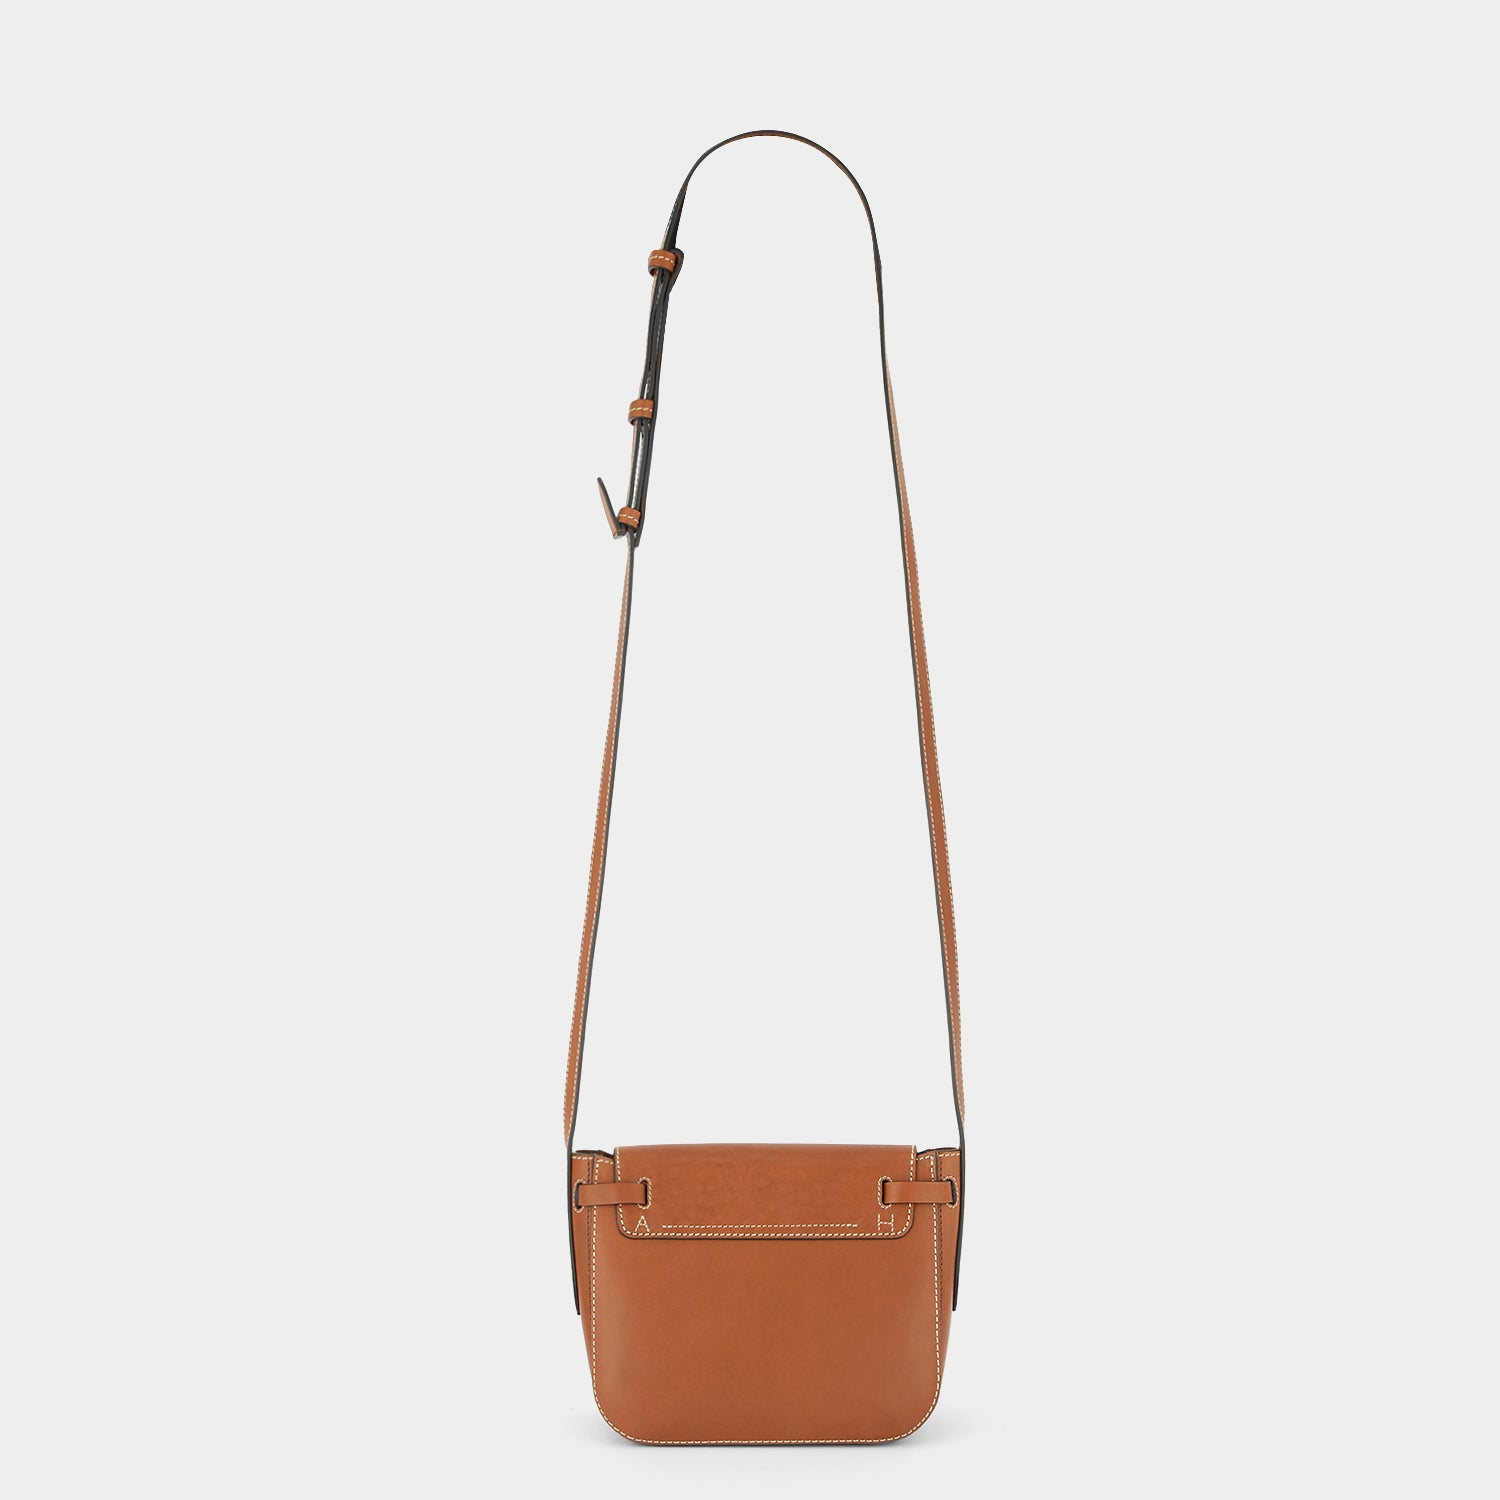 Return to Nature Cross-body -

                  
                    Compostable Leather in Tan -
                  

                  Anya Hindmarch UK
